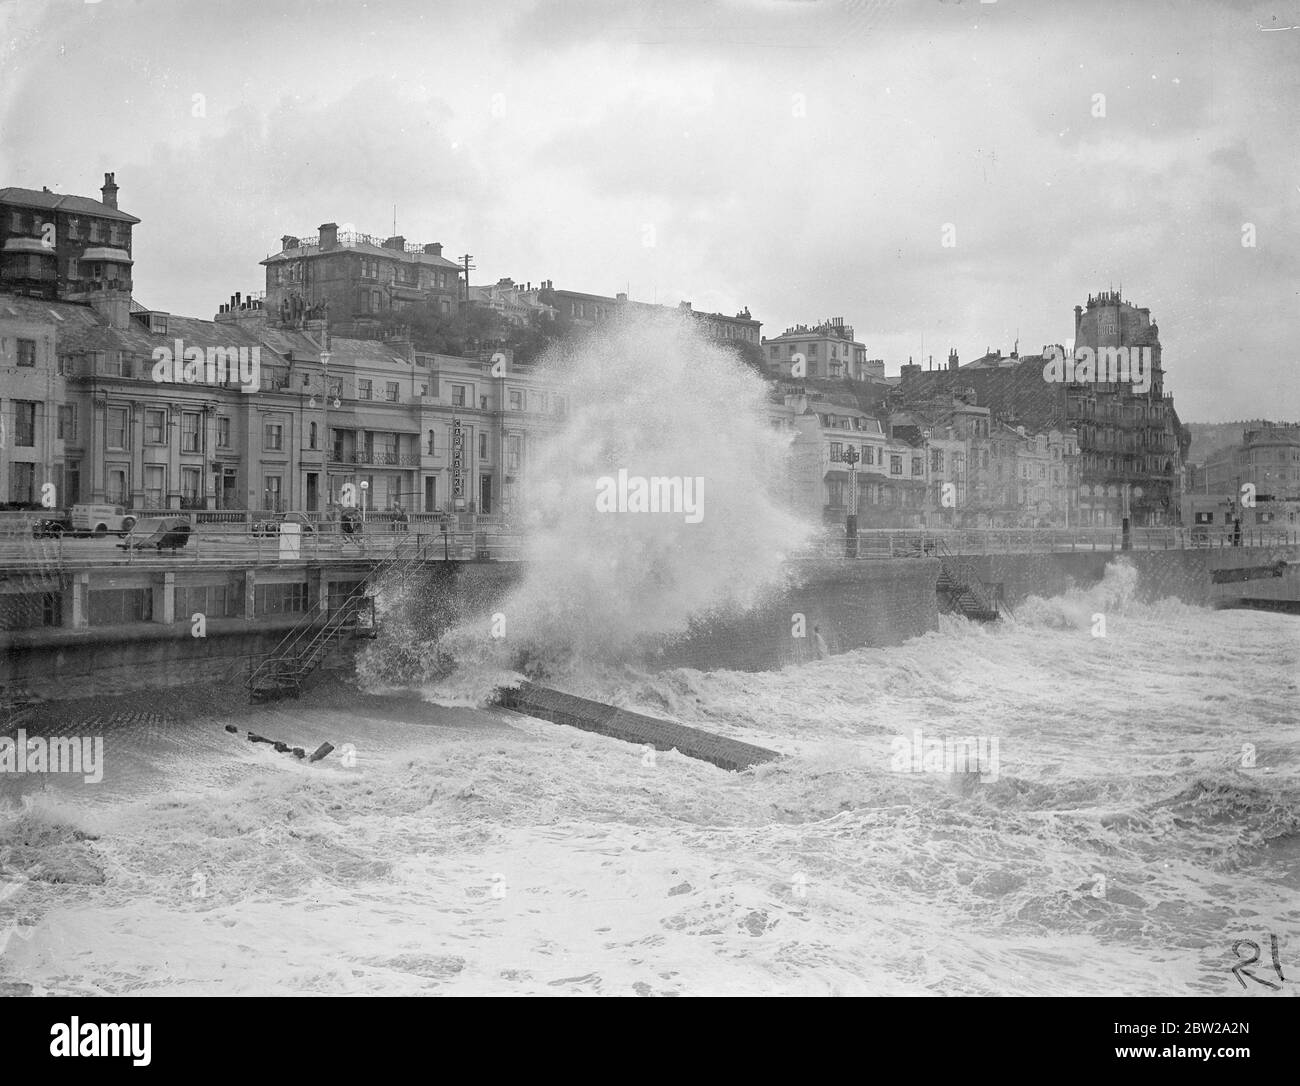 Huge waves broke over the front at Hastings during a Gale, which ravaged the south coast. Photo shows, giant waves which seemed to top the buildings breaking over the front at Hastings drama Gale. 23 October 1937 Stock Photo